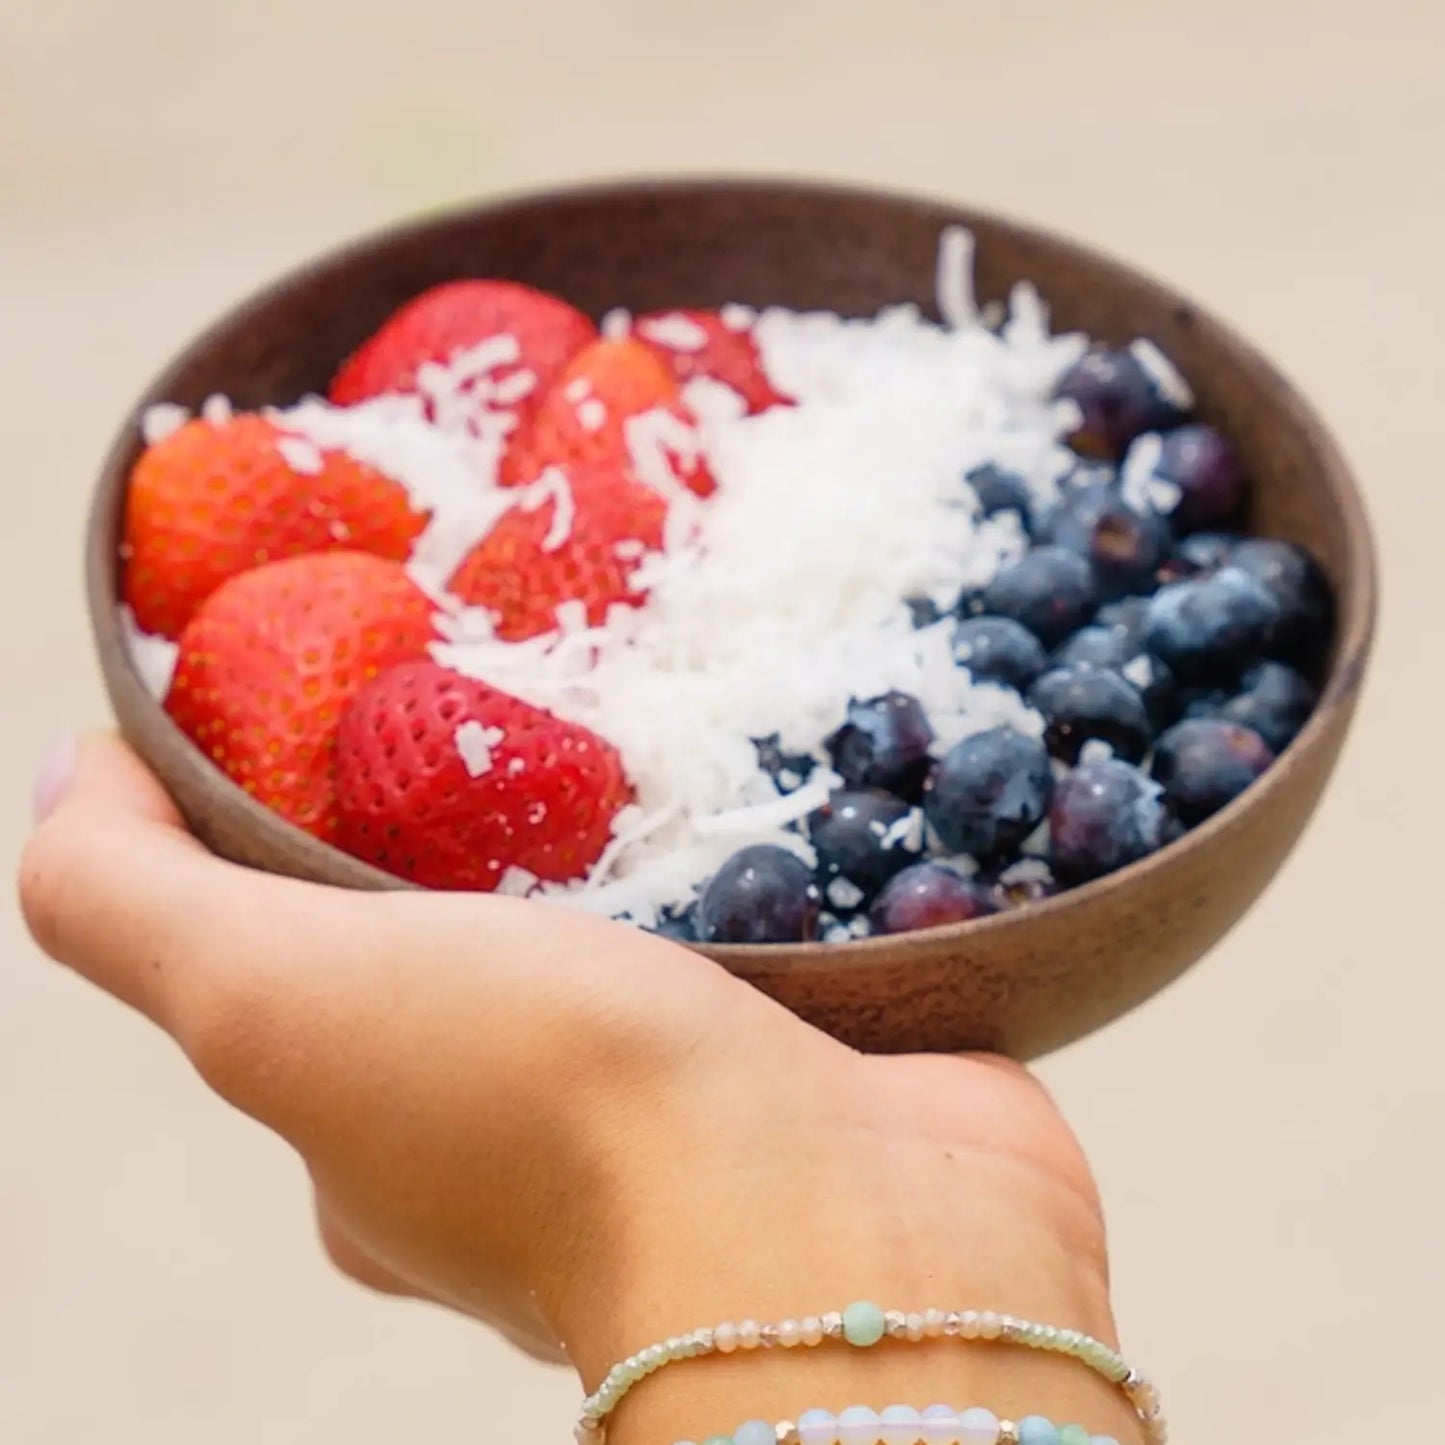 woman's hand holding a bowl of berries wearing a green Amazonite bracelet on wrist